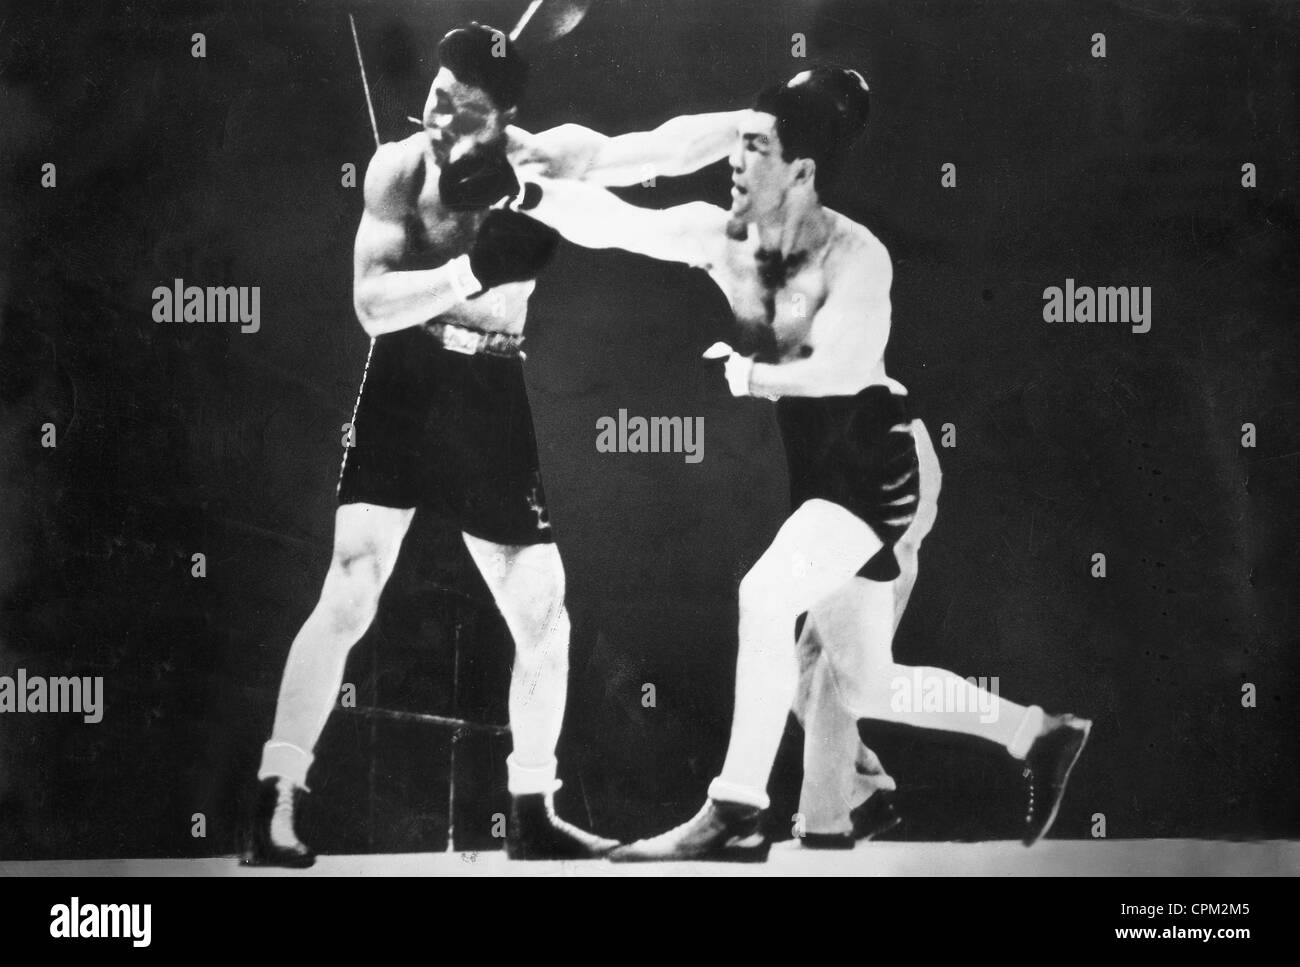 Image result for schmeling knocks out louis - 1936